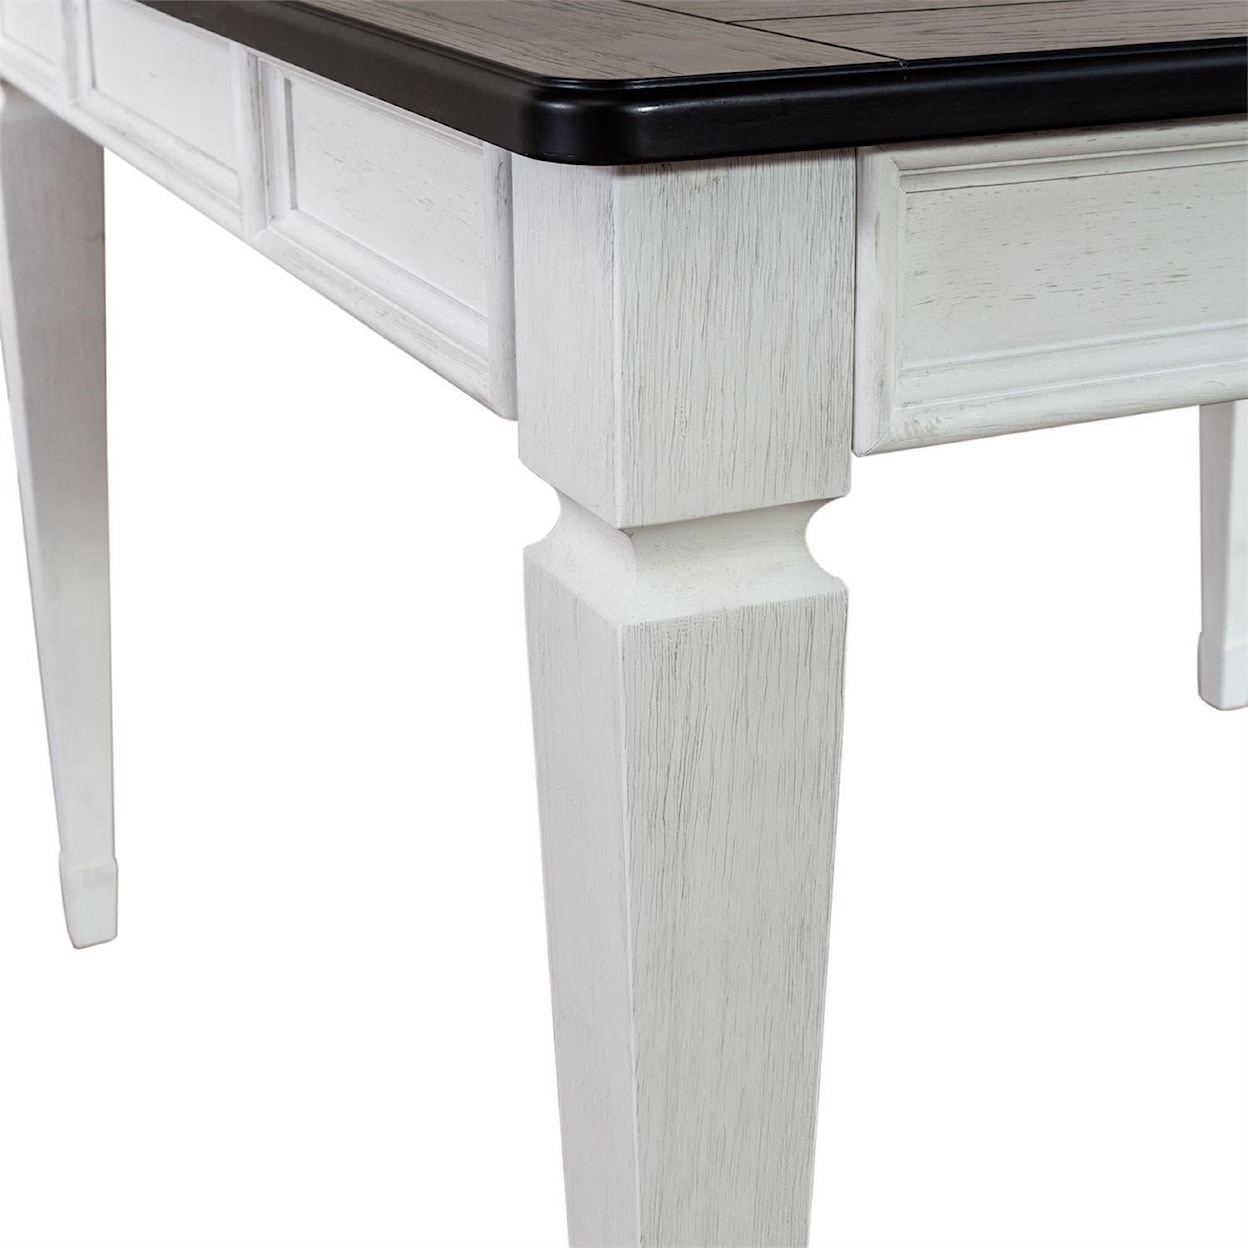 Liberty Furniture Allyson Park Counter Height Leg Table